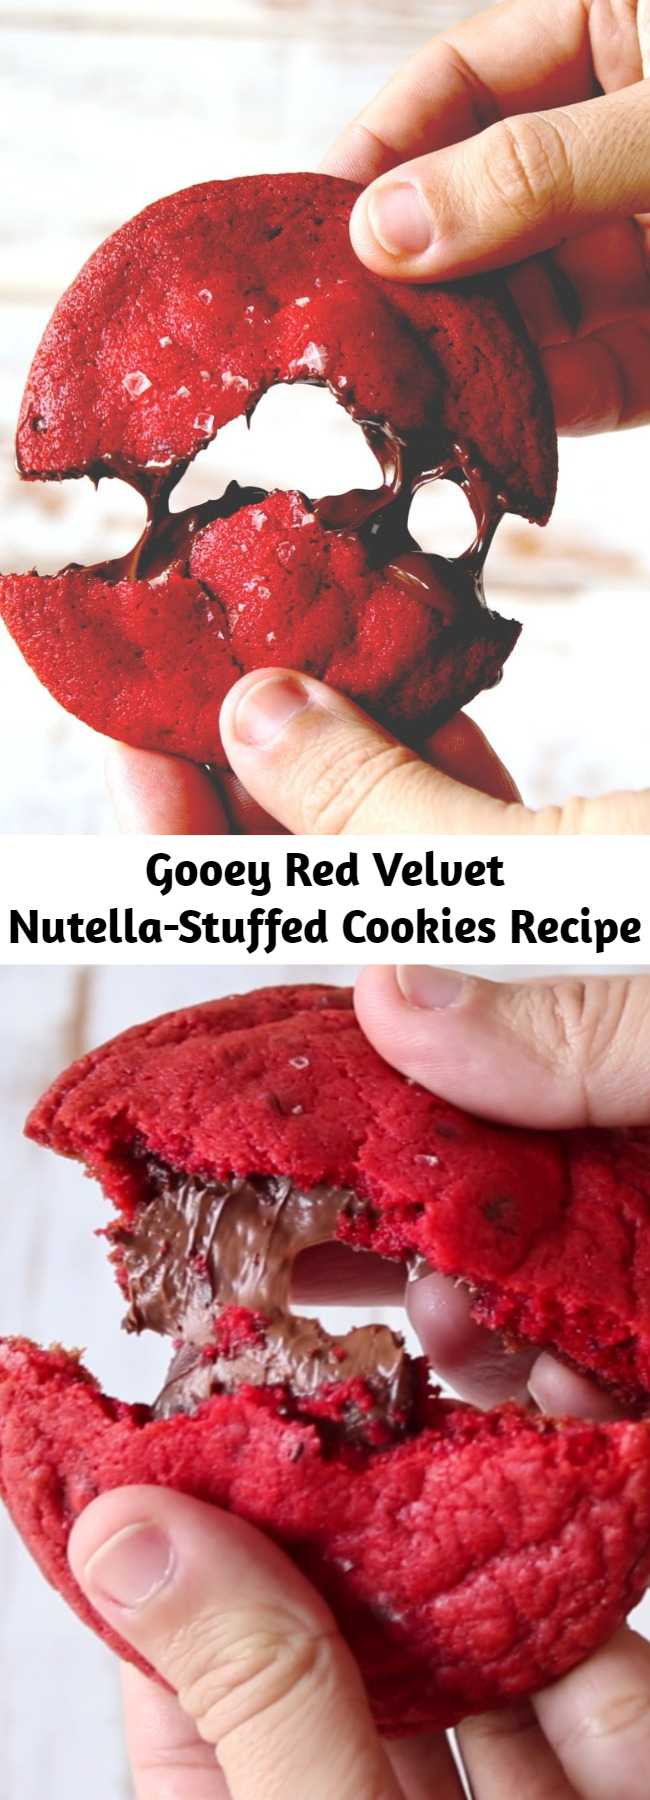 Gooey Red Velvet Nutella-Stuffed Cookies Recipe - Red velvet cookies are even better when they're stuffed with warm melted Nutella. Oh baby! You won't be able to stop at one. So rich and gooey, they speak for themselves.